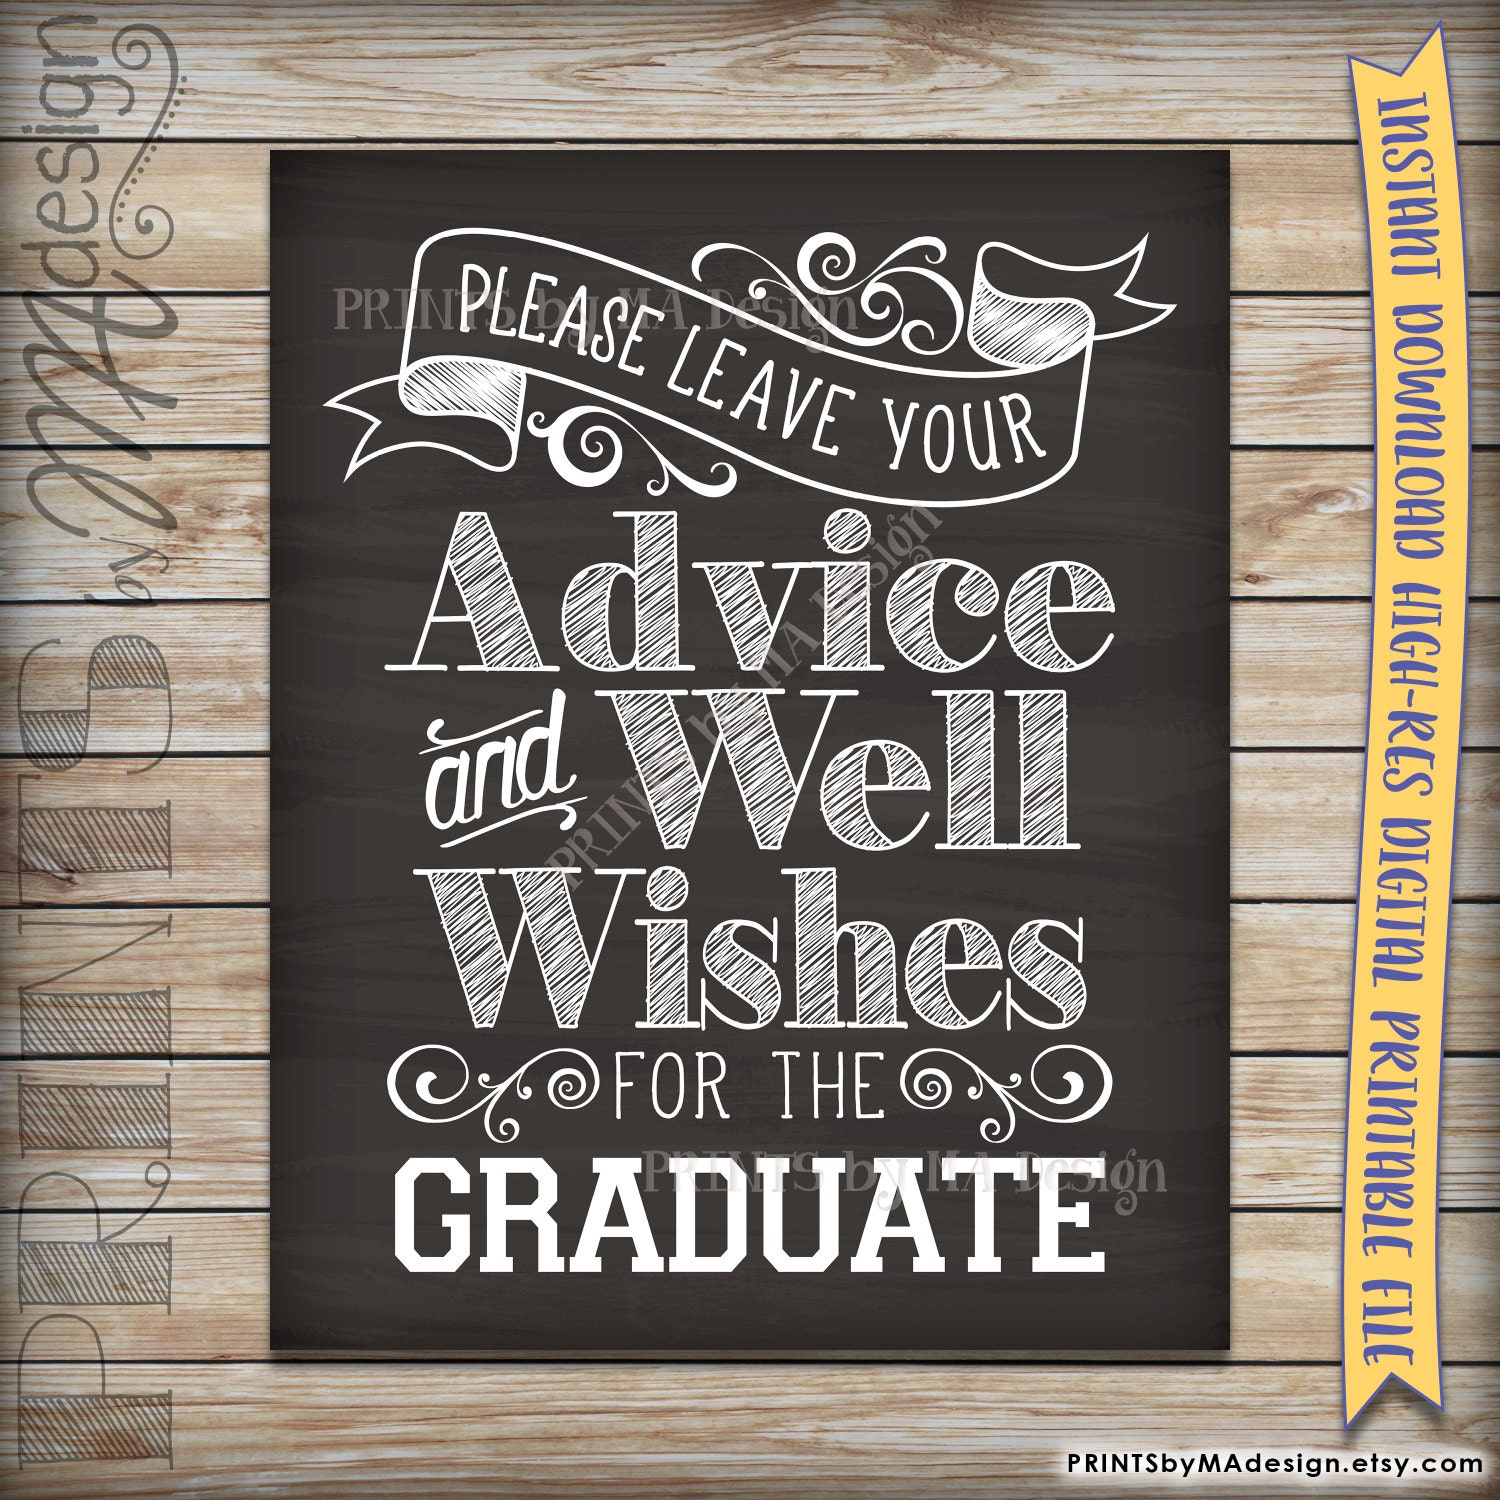 Graduation Advice, Please Leave your Advice and Well Wishes for the